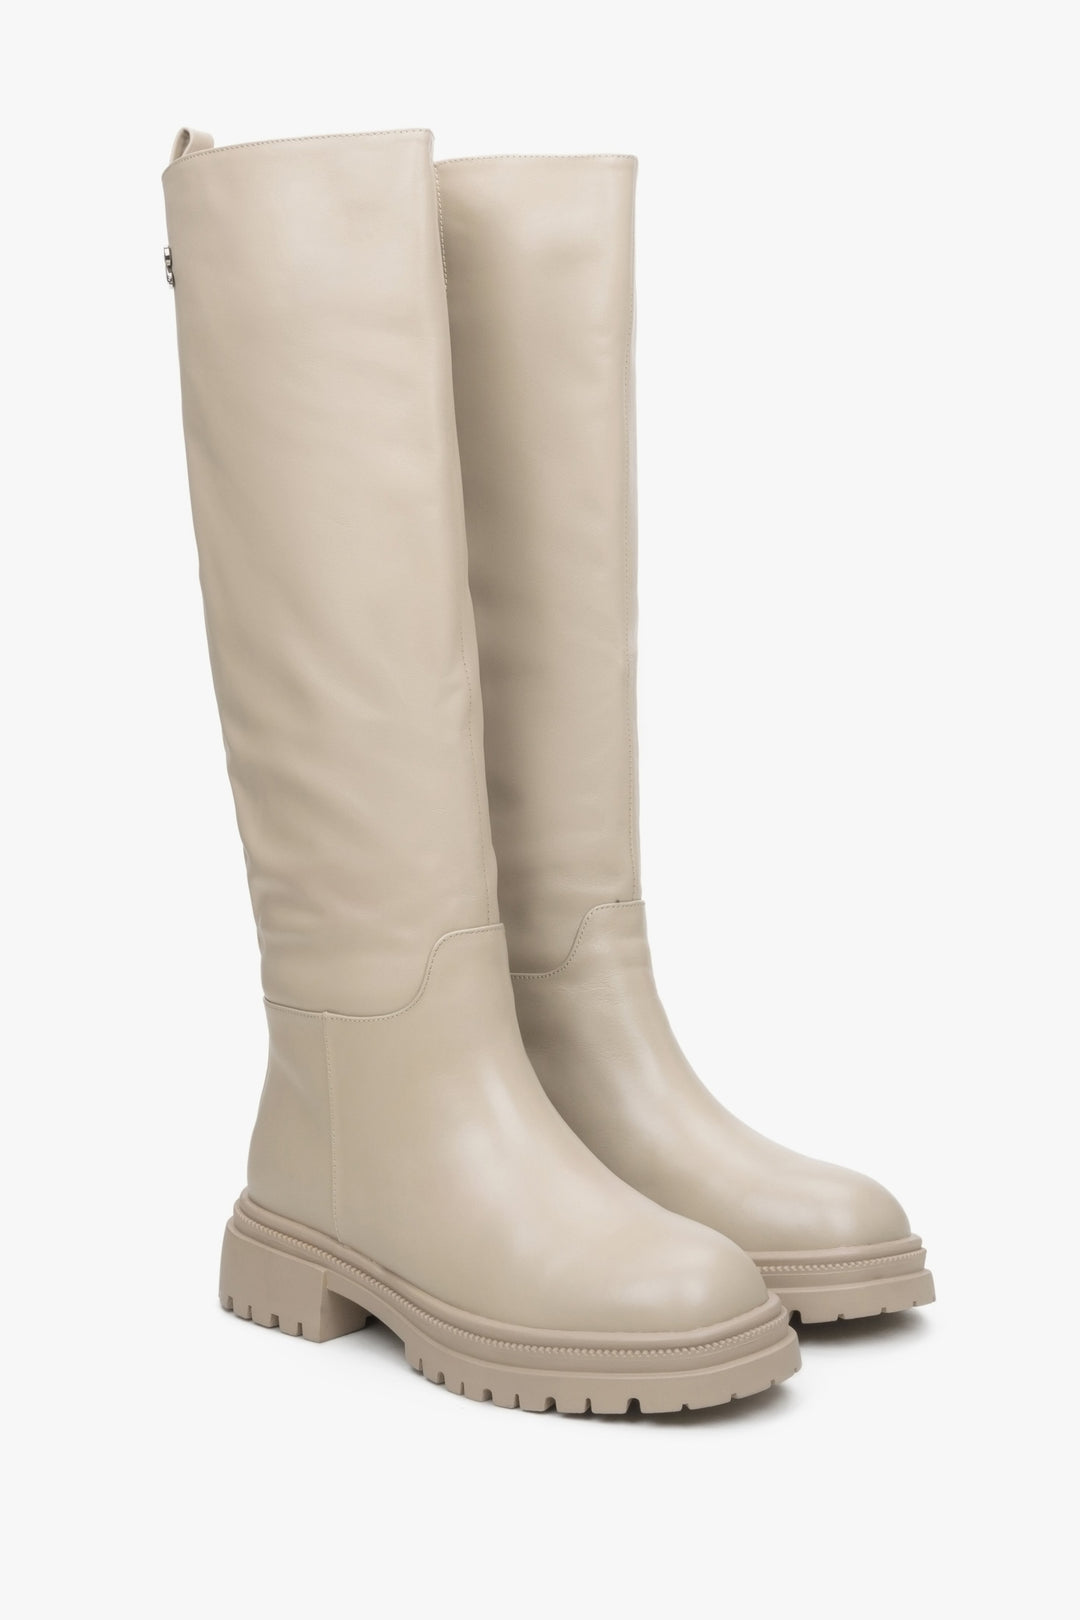 Women's high beige leather boots by Estro.